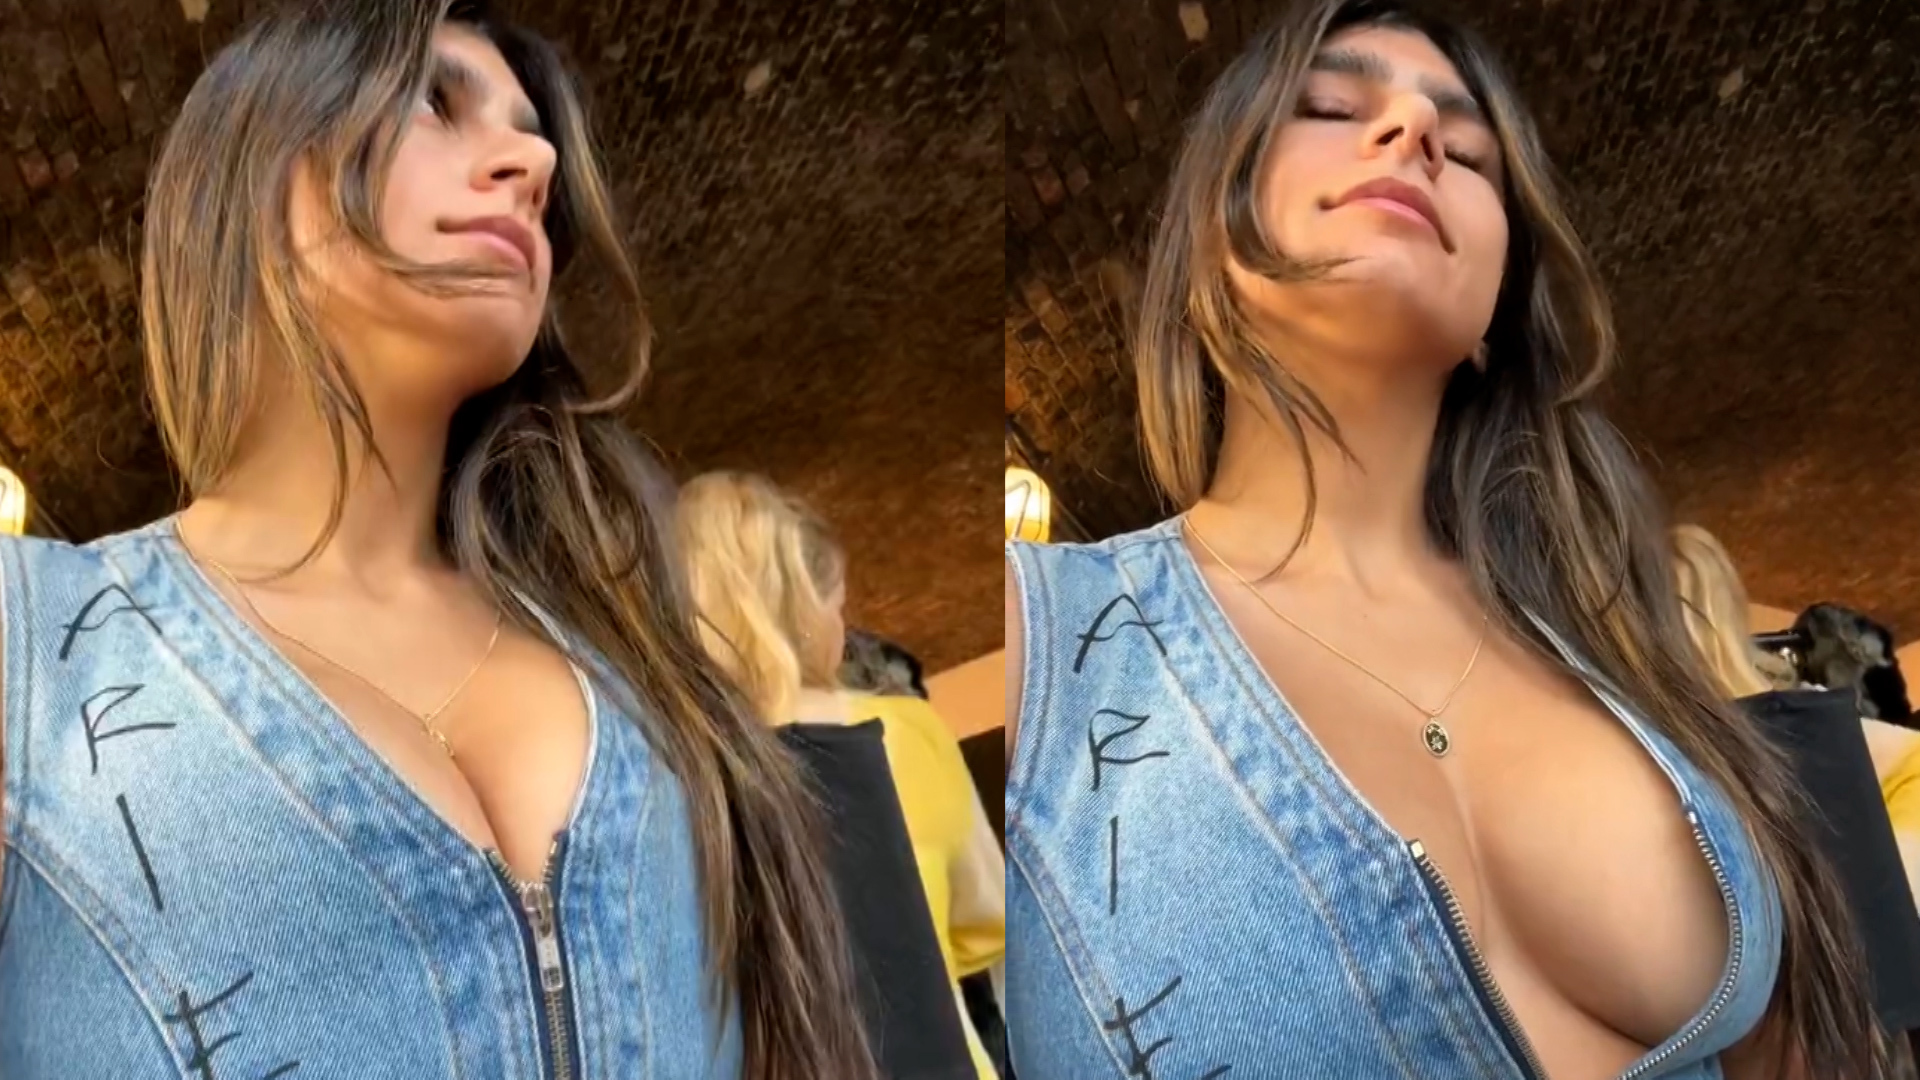 Mia Khalifa takes the breath away from her followers on Twitter